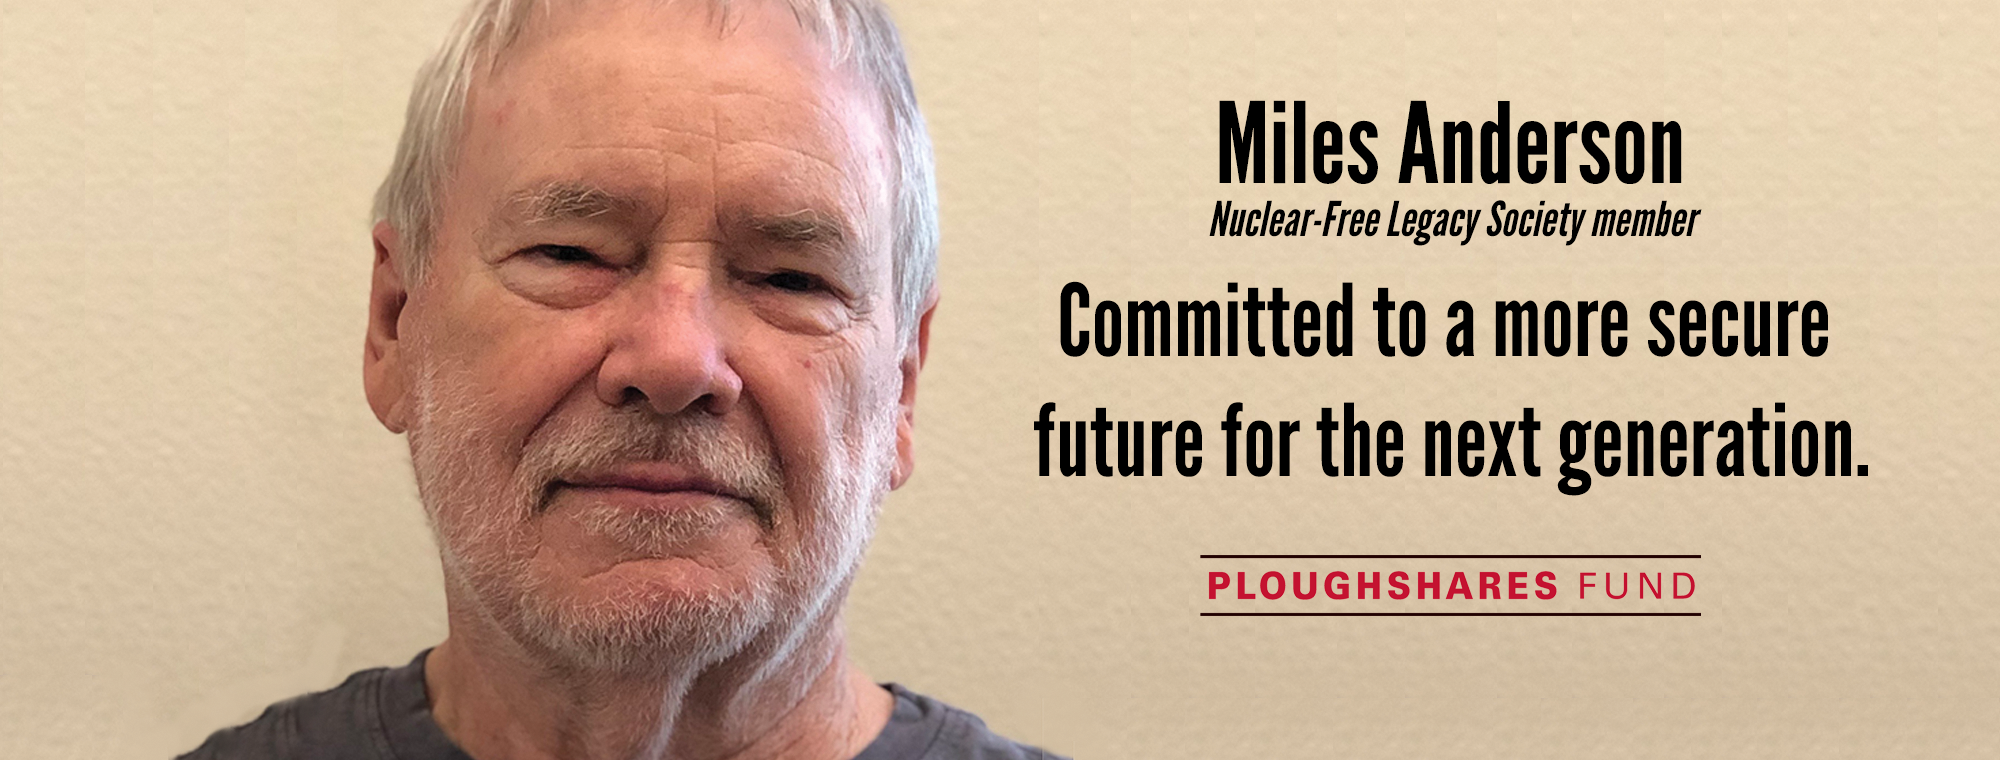 Nuclear-Free Legacy Society, Ploughshares Fund